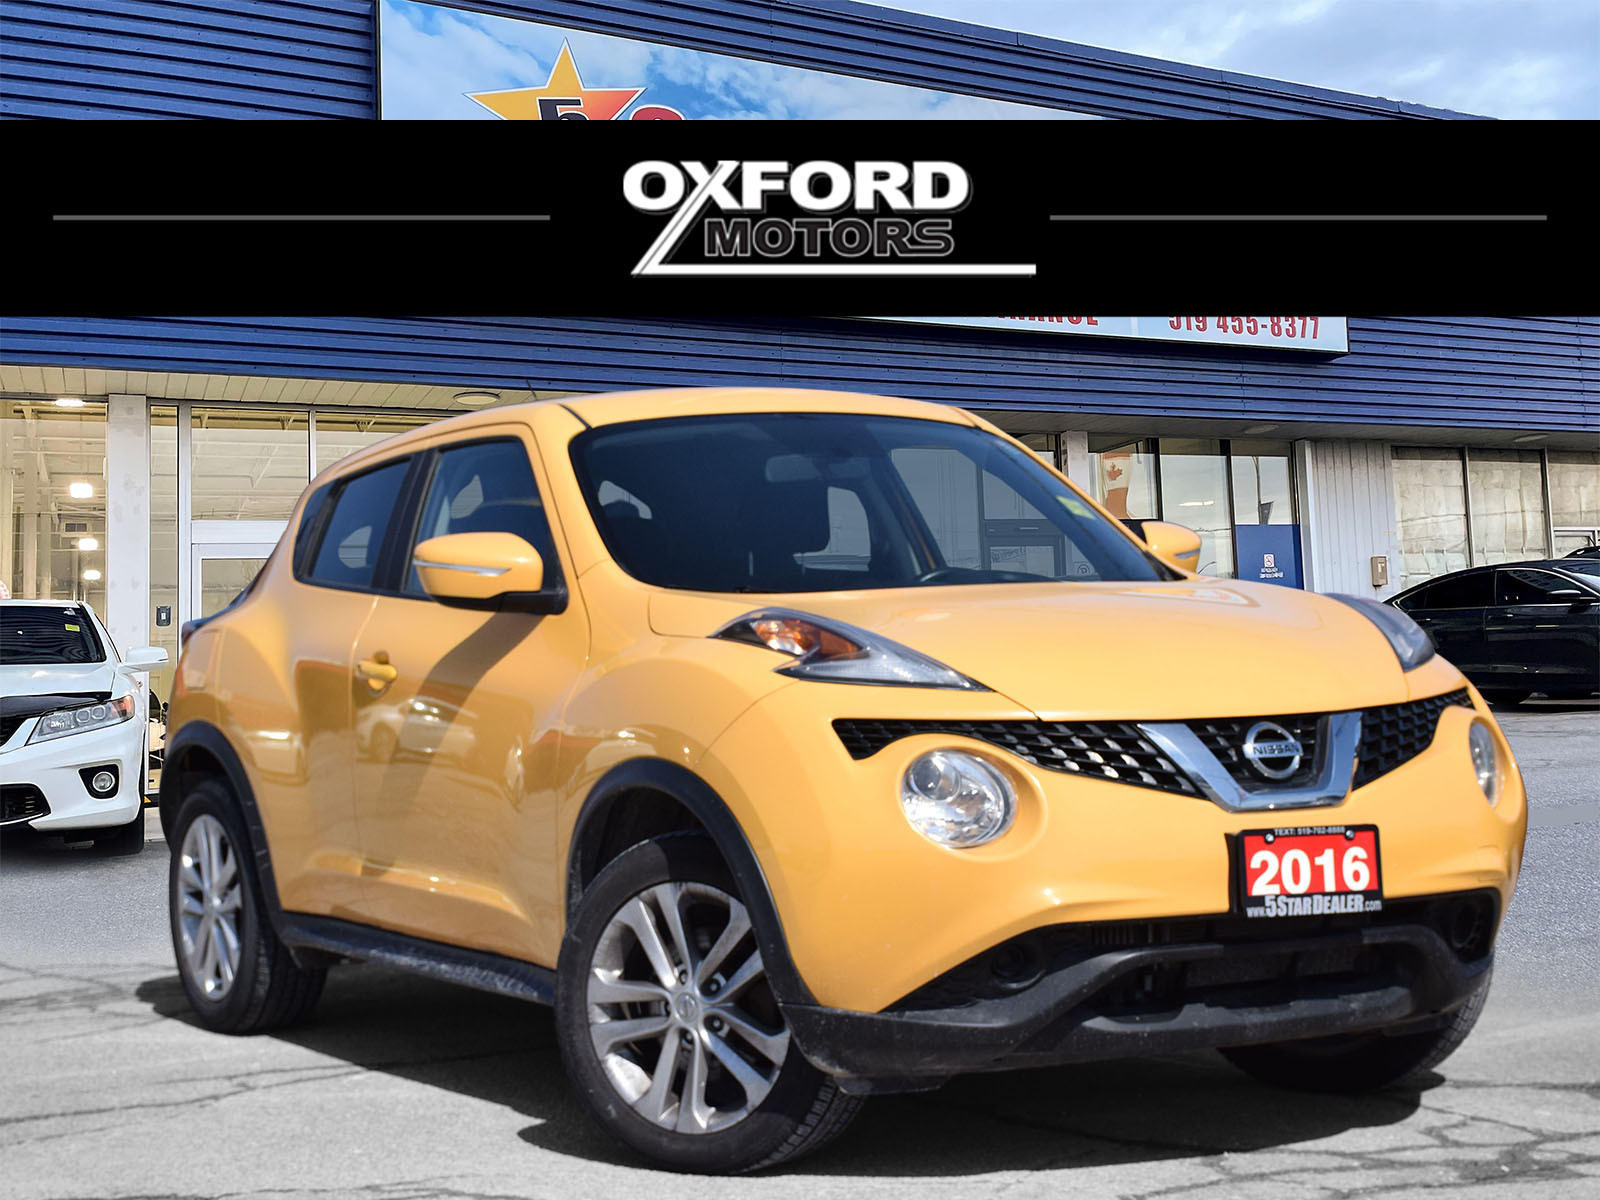 2016 Nissan Juke EXCELLENT CONDITION! LOADED! WE FINANCE ALL CREDIT